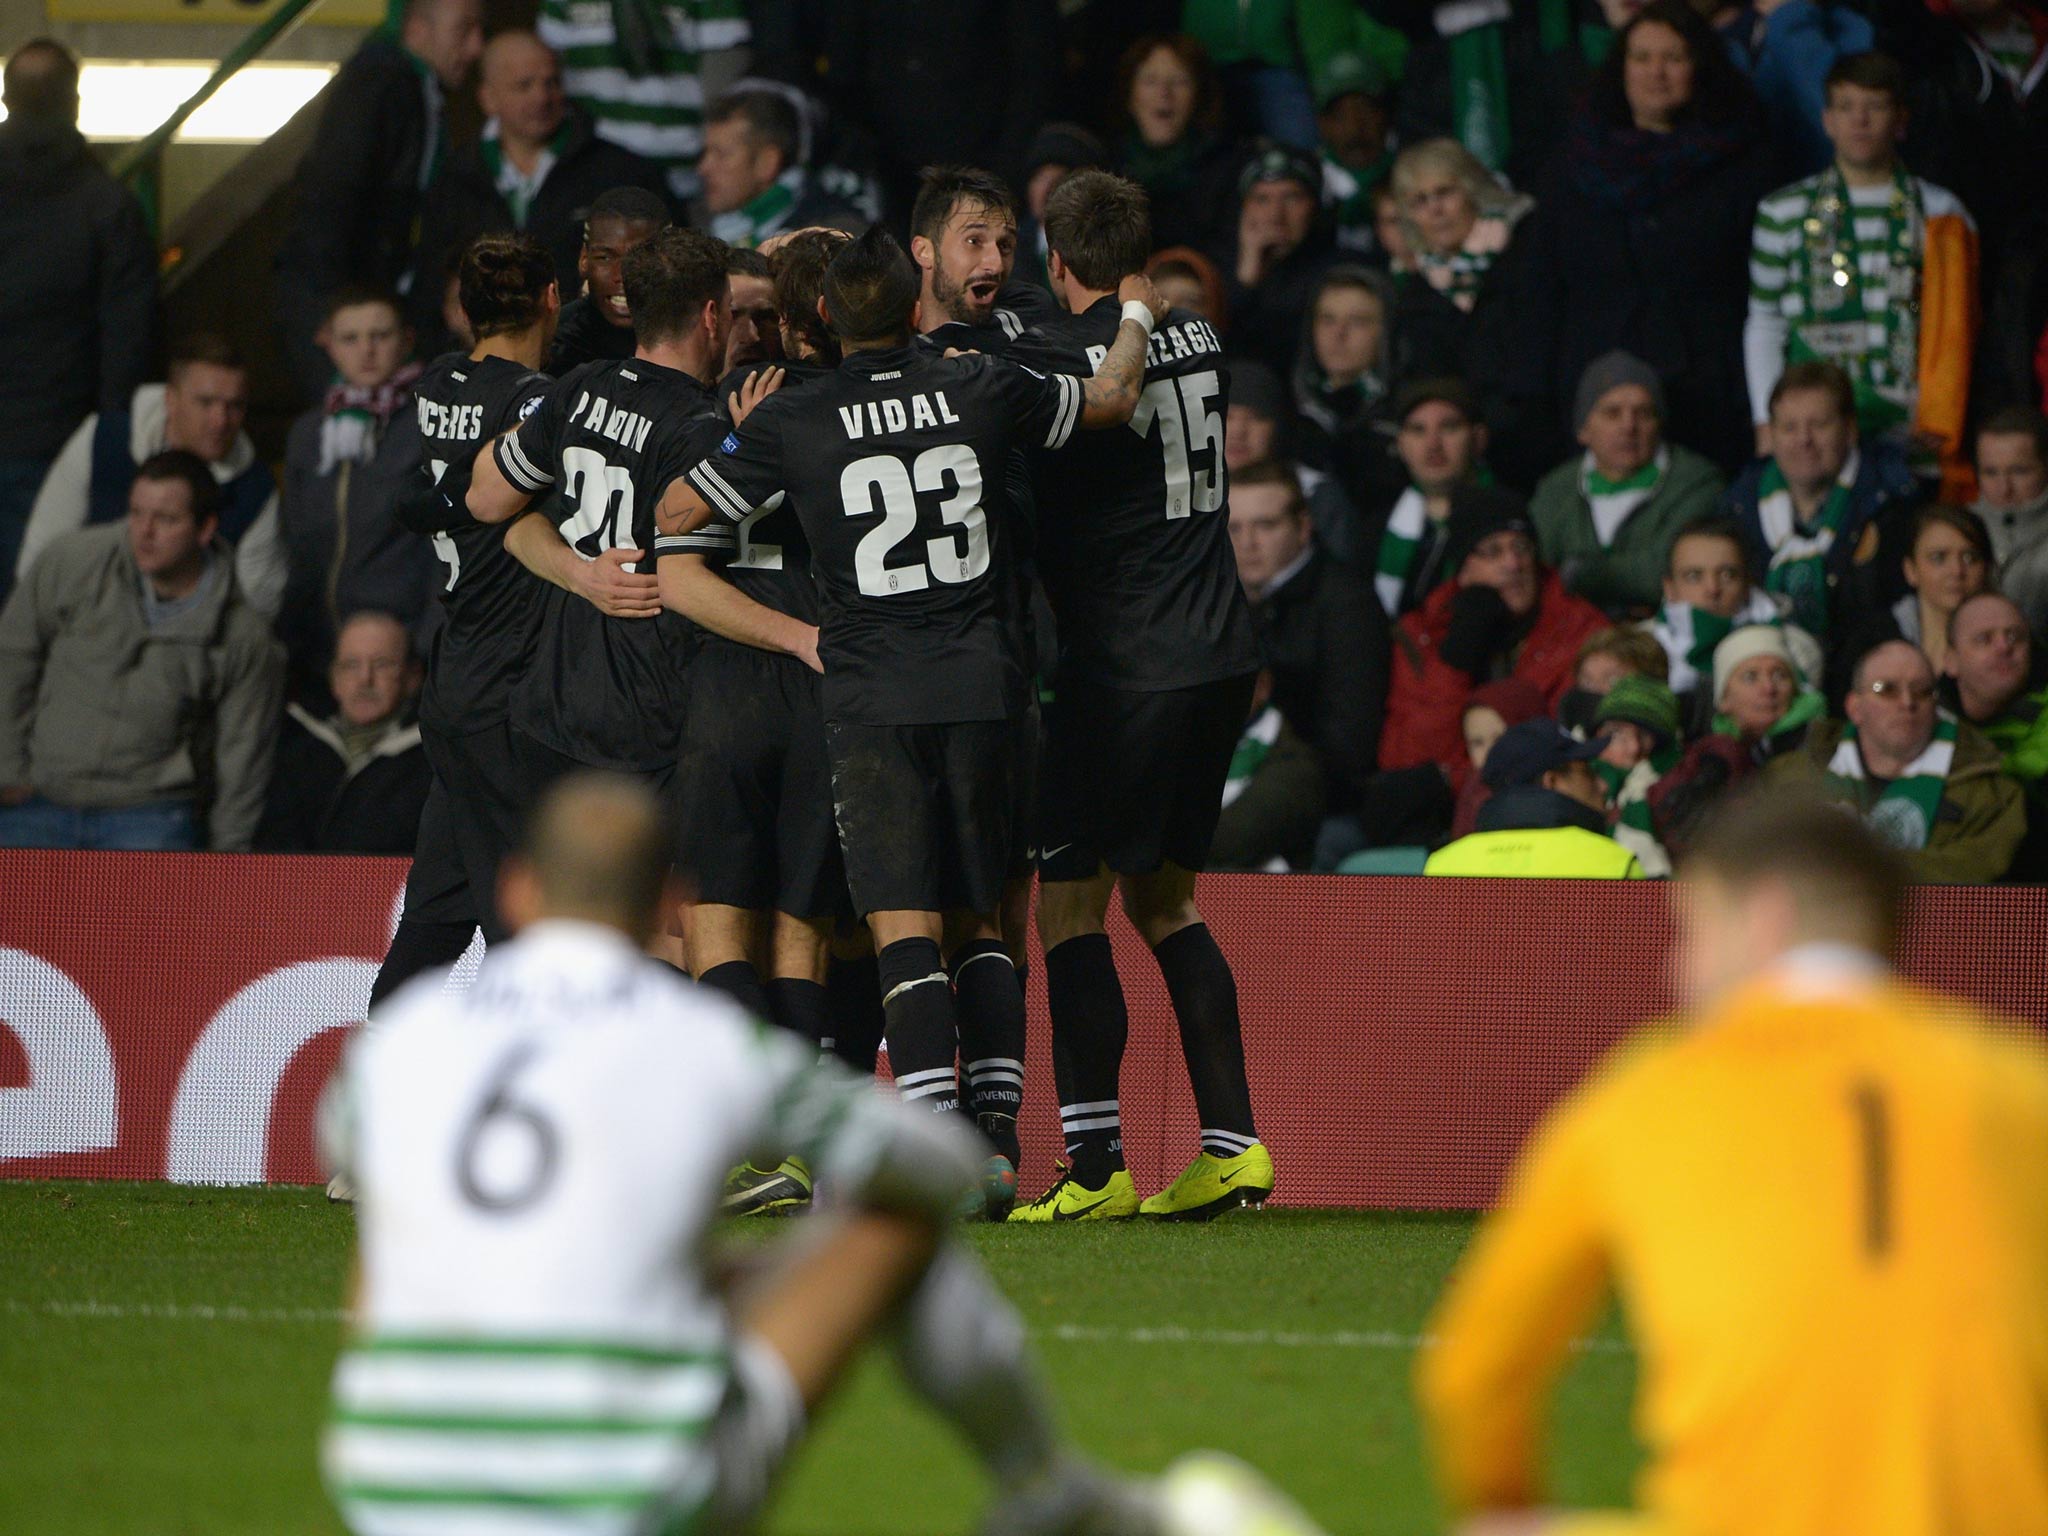 Mirko Vucinic of Juventus celebrates with his team-mates after scoring his team's third goal against Celtic